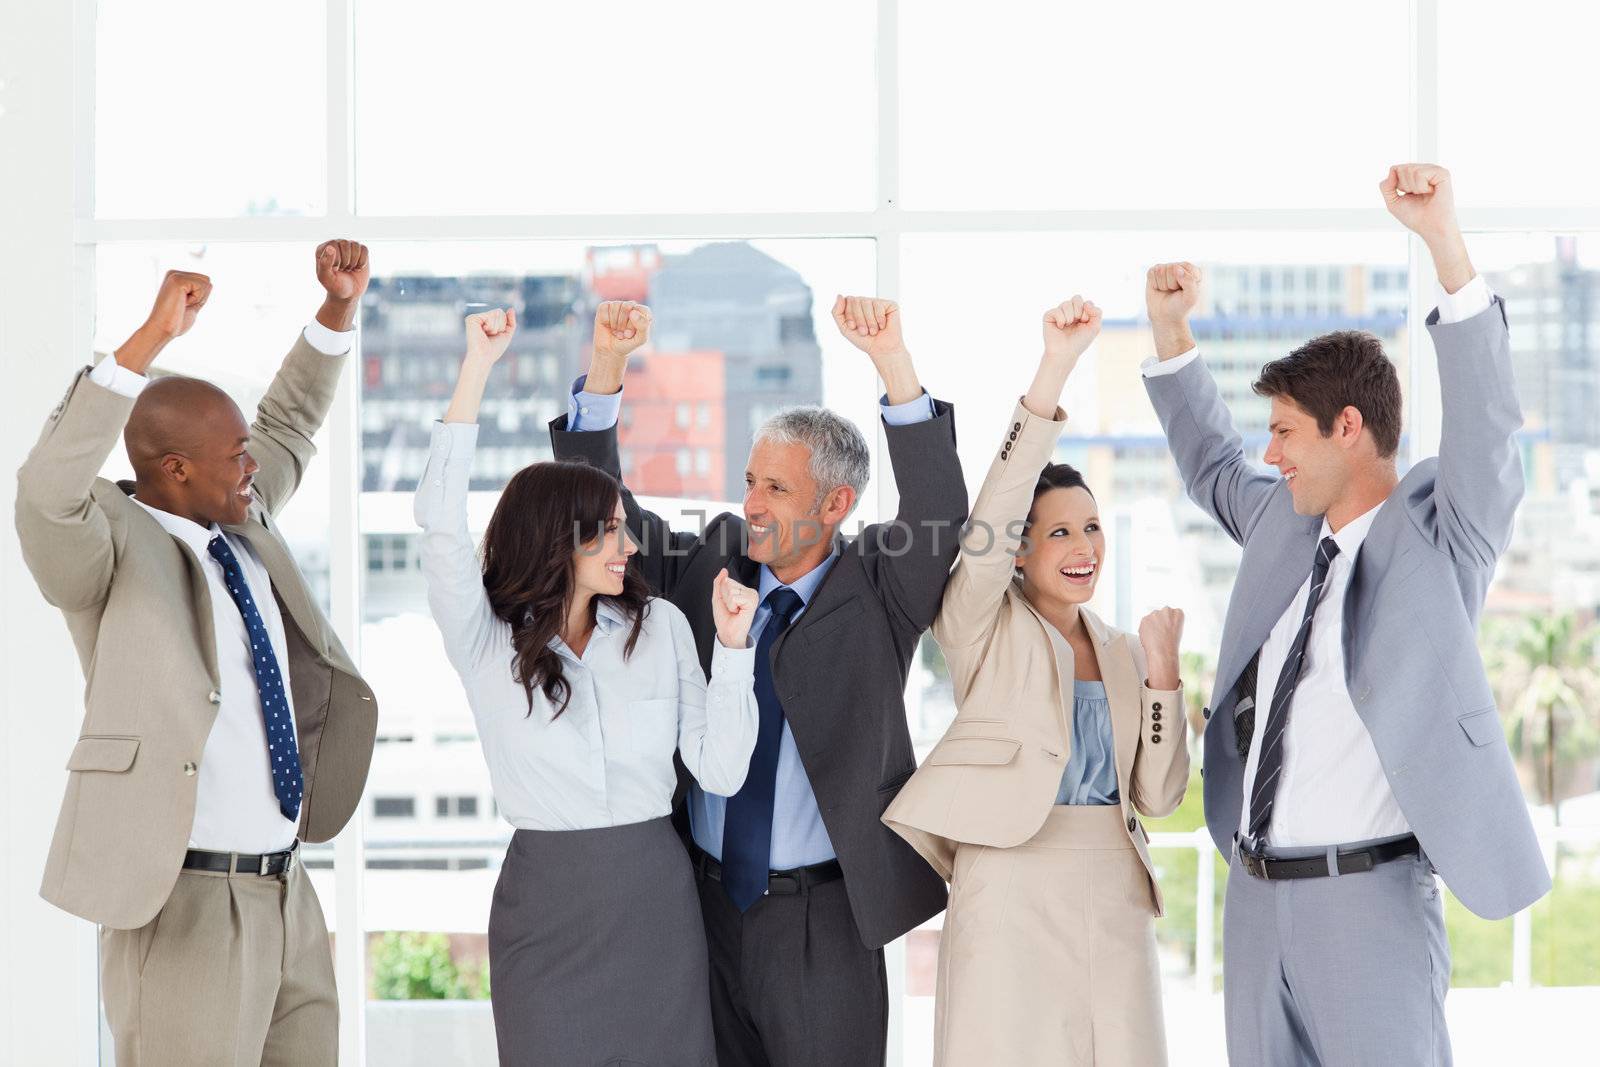 Five business people looking at each other and raising their arm by Wavebreakmedia